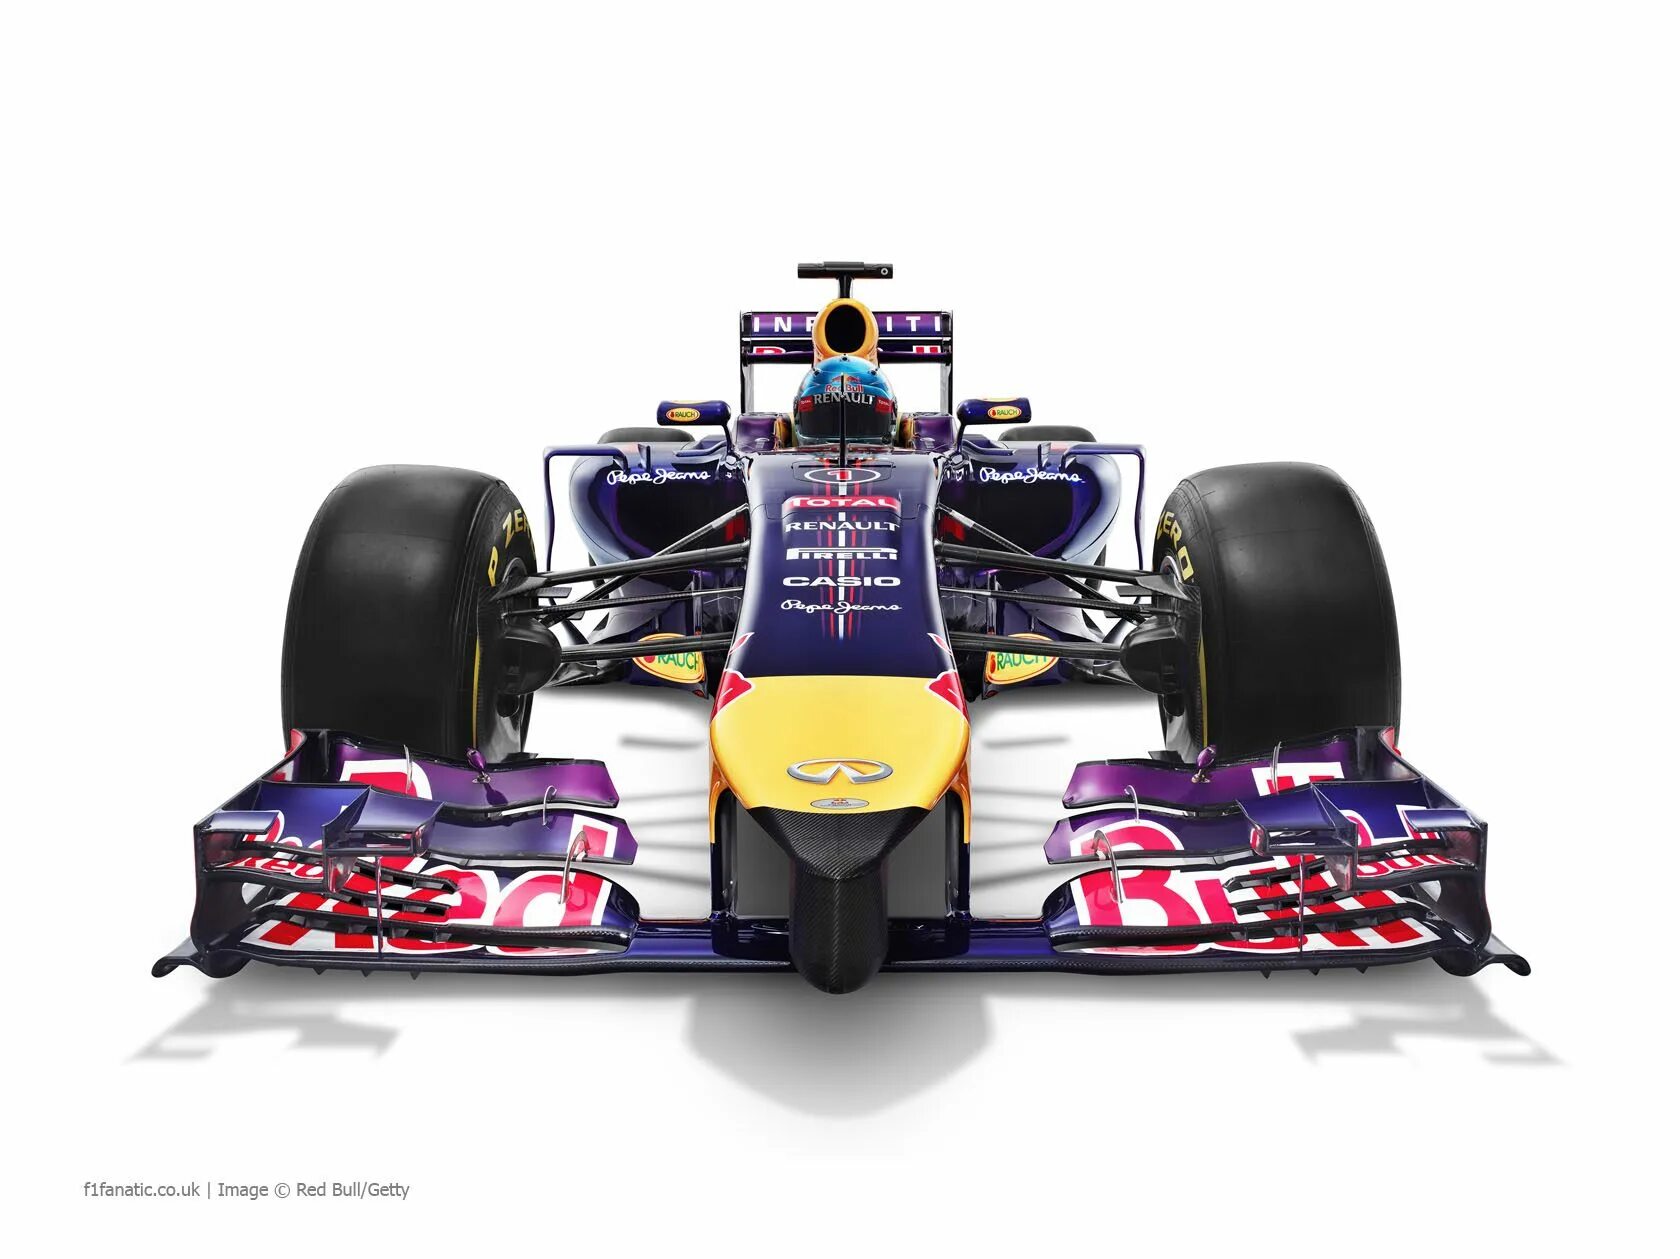 Red bull f1 rb10. Red bull Racing rb10. Red bull Renault rb10. F1 2014 Red bull.